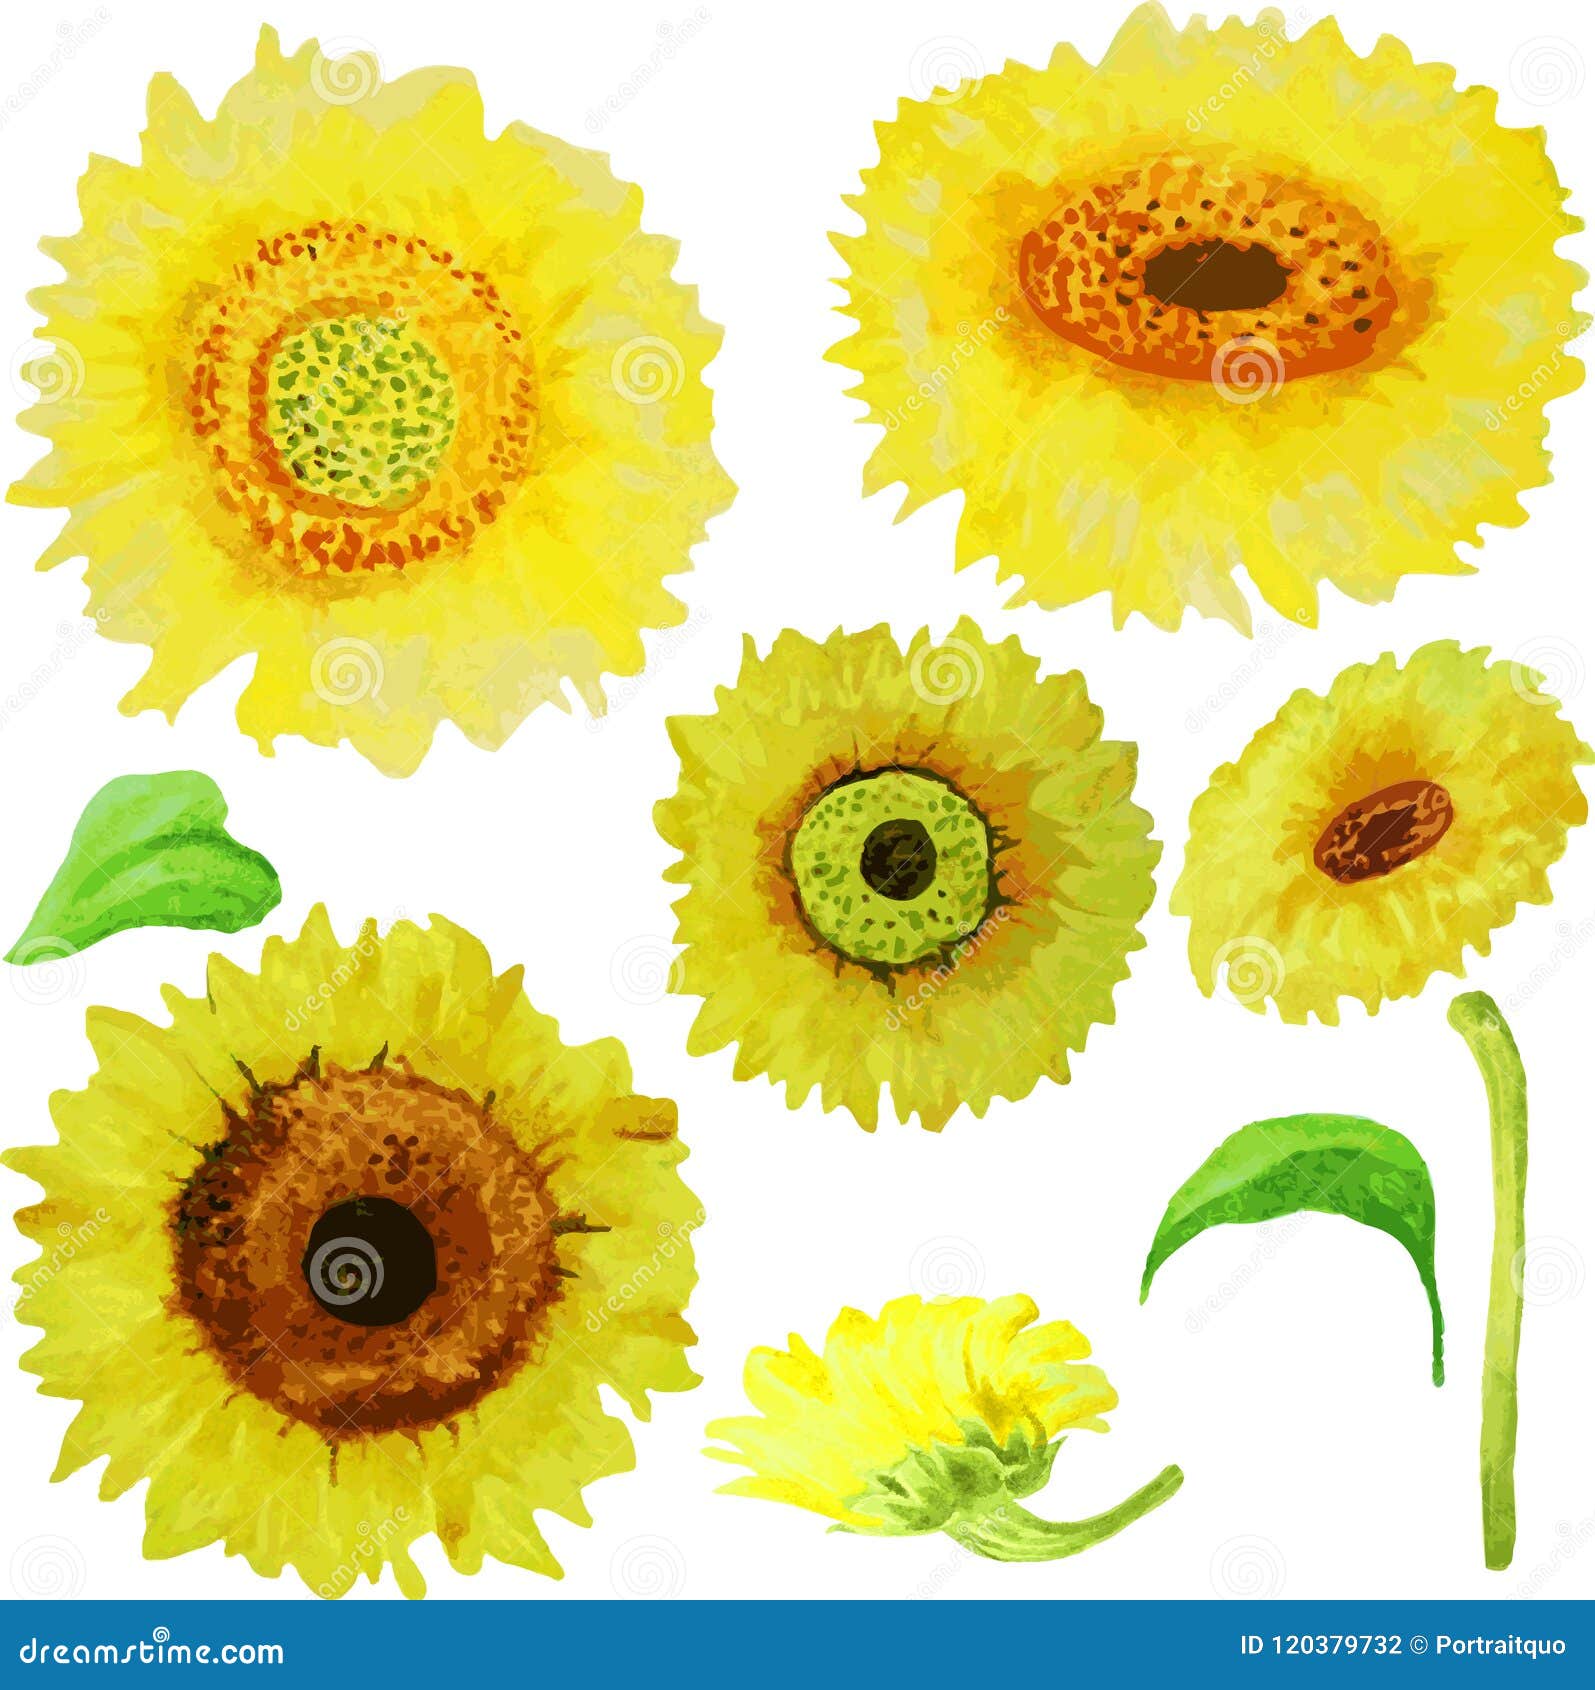 Download Yellow Watercolor Sunflowers Isolated On White Background ...